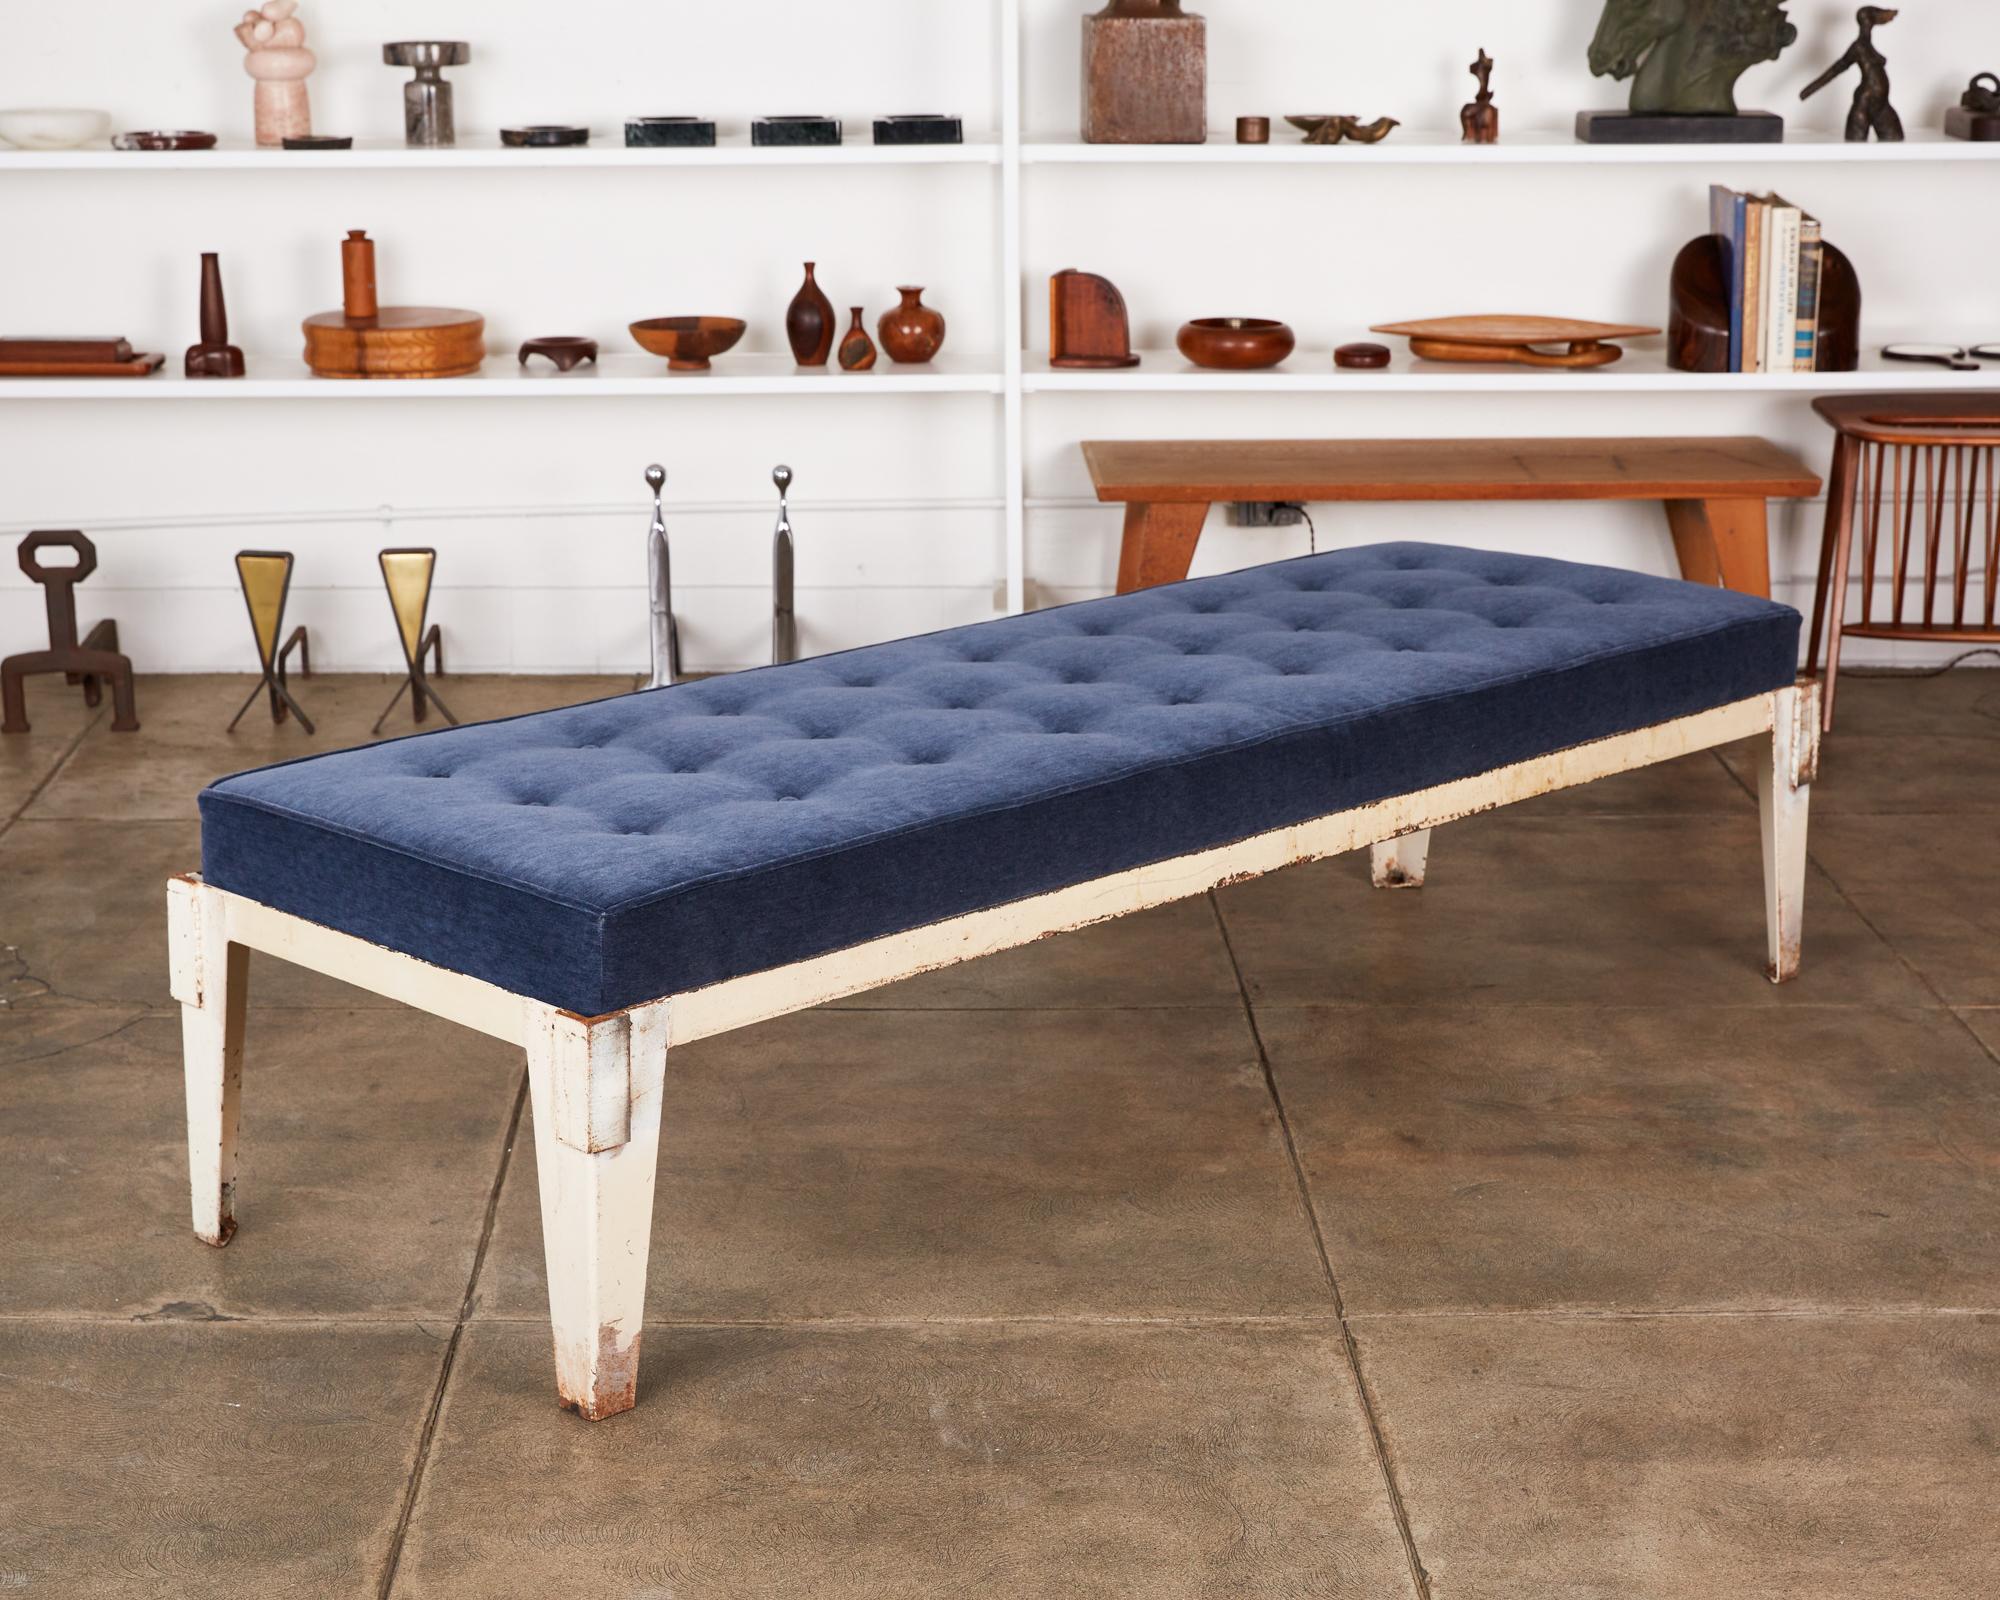 Jean Prouvé style patinated steel daybed with tufted cushion in Italian indigo cotton velvet. Cushions can be COM or we can provide upholstery options. We have 4 daybed frames available.

Dimensions: 81.5” width x 27.5” depth x 20”